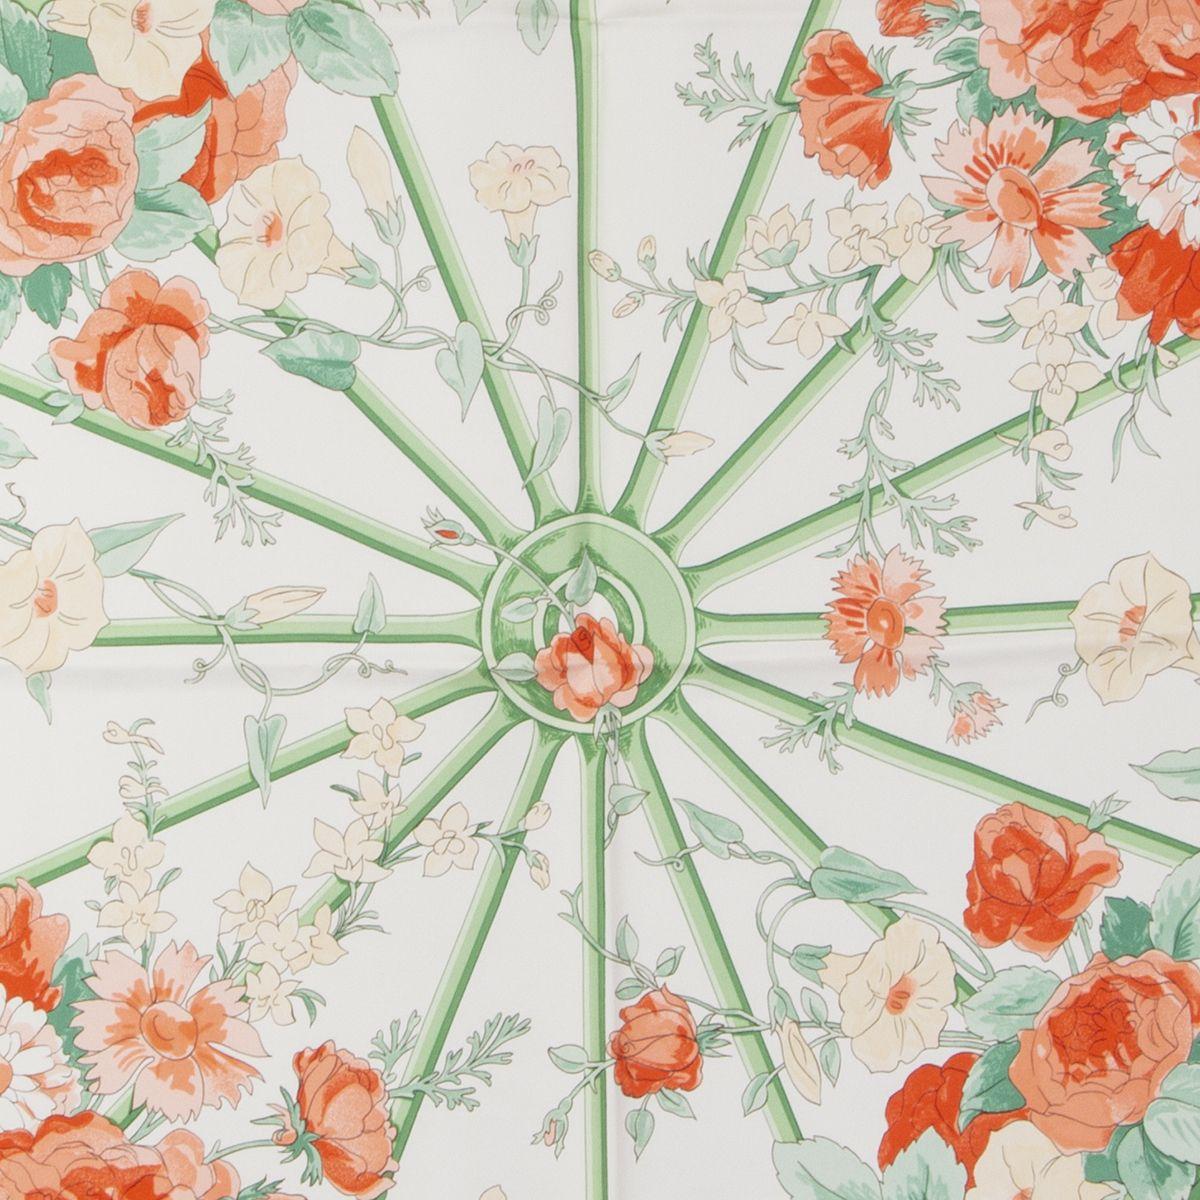 Hermes 'Romantique 90' scarf by Maurice Tranchant in white silk twill (100%) with mint green border and details in red. Has been worn and is in excellent condition.

Width 90cm (35.1in)
Height 90cm (35.1in)
